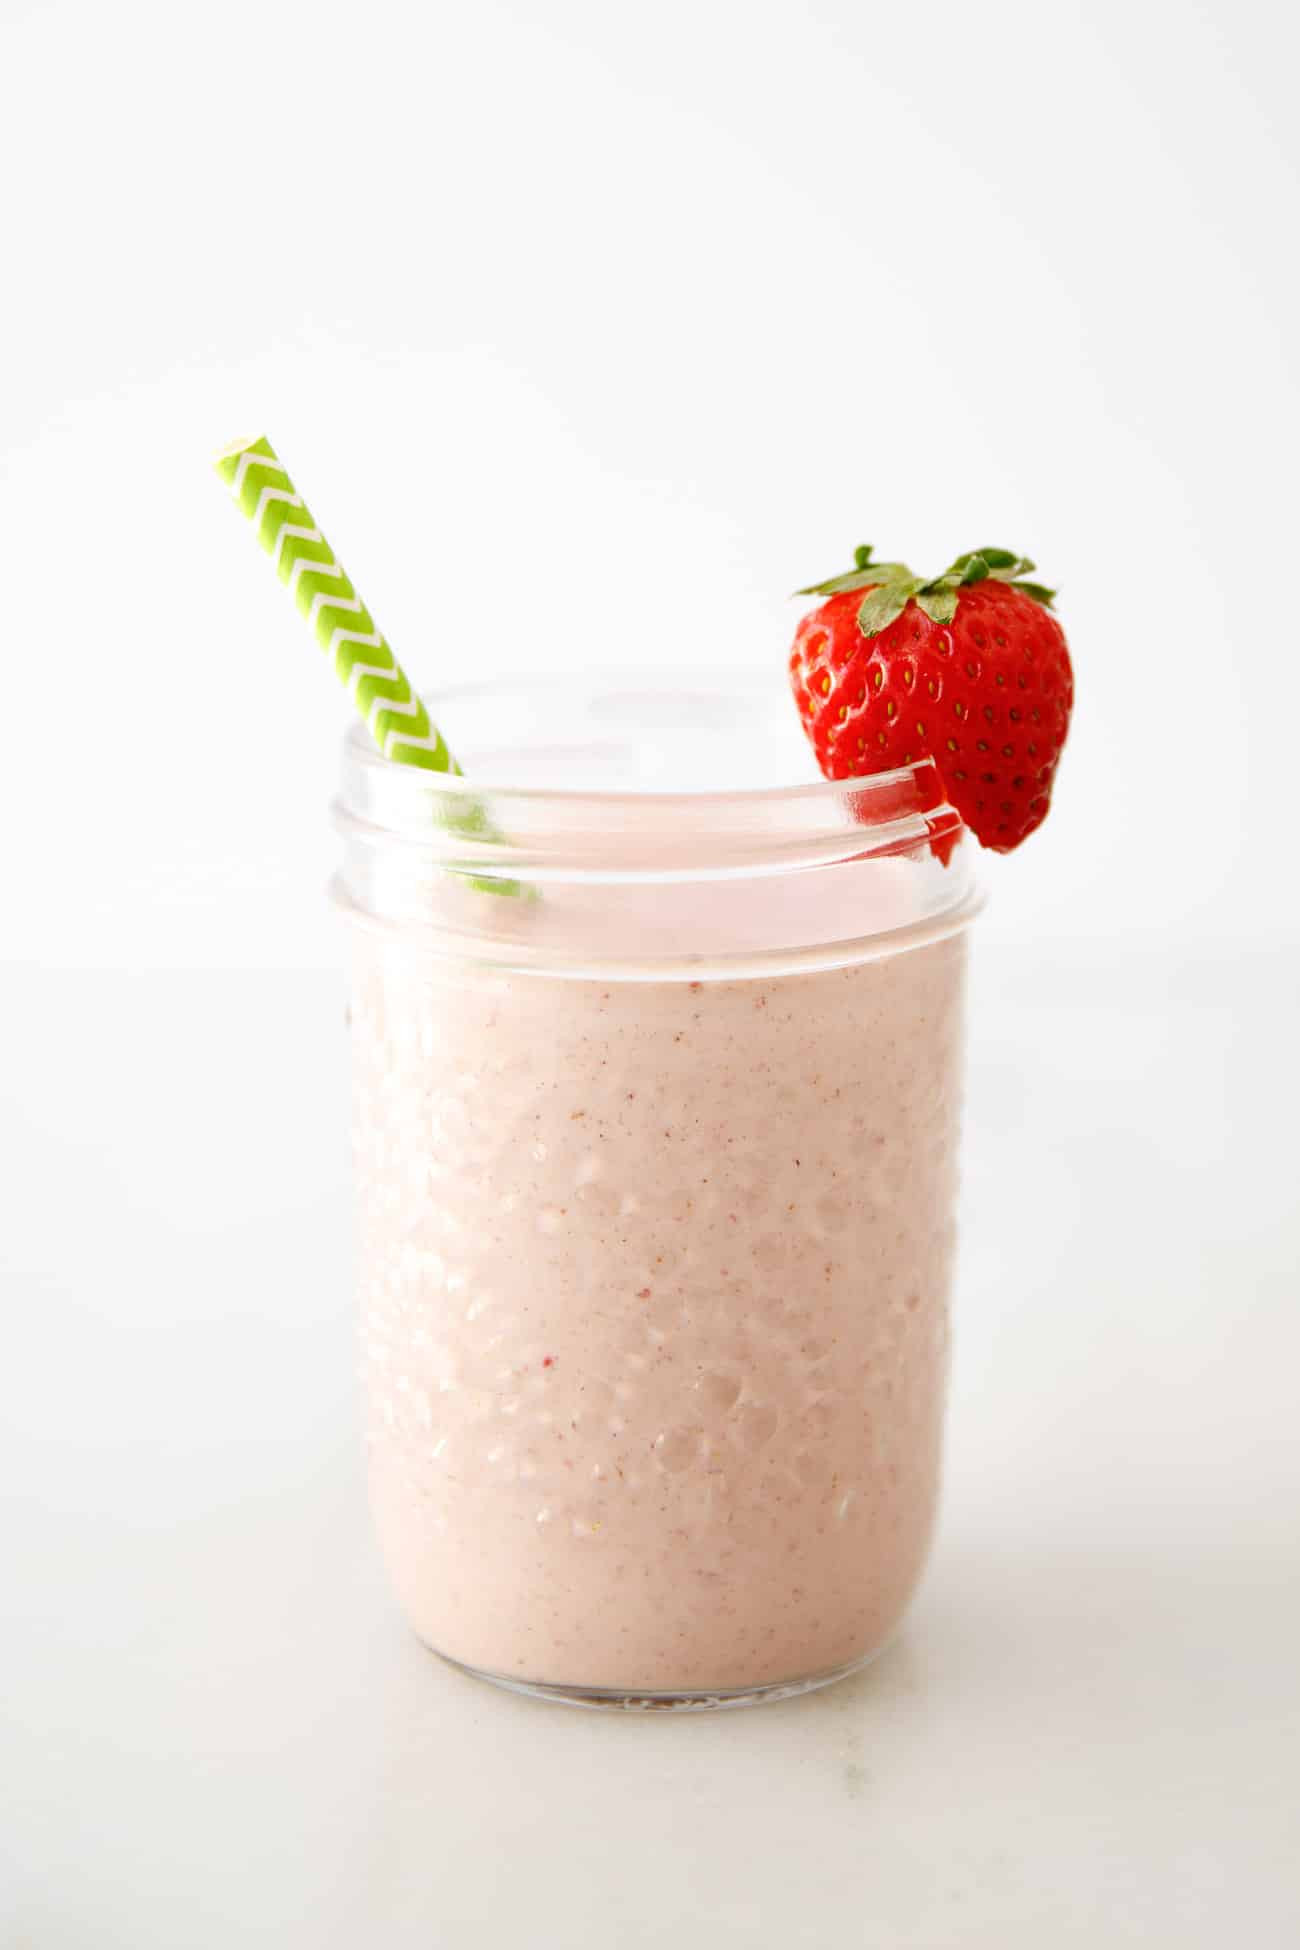 Breakfast Smoothie Recipes
 Healthy Breakfast Smoothies for Kids